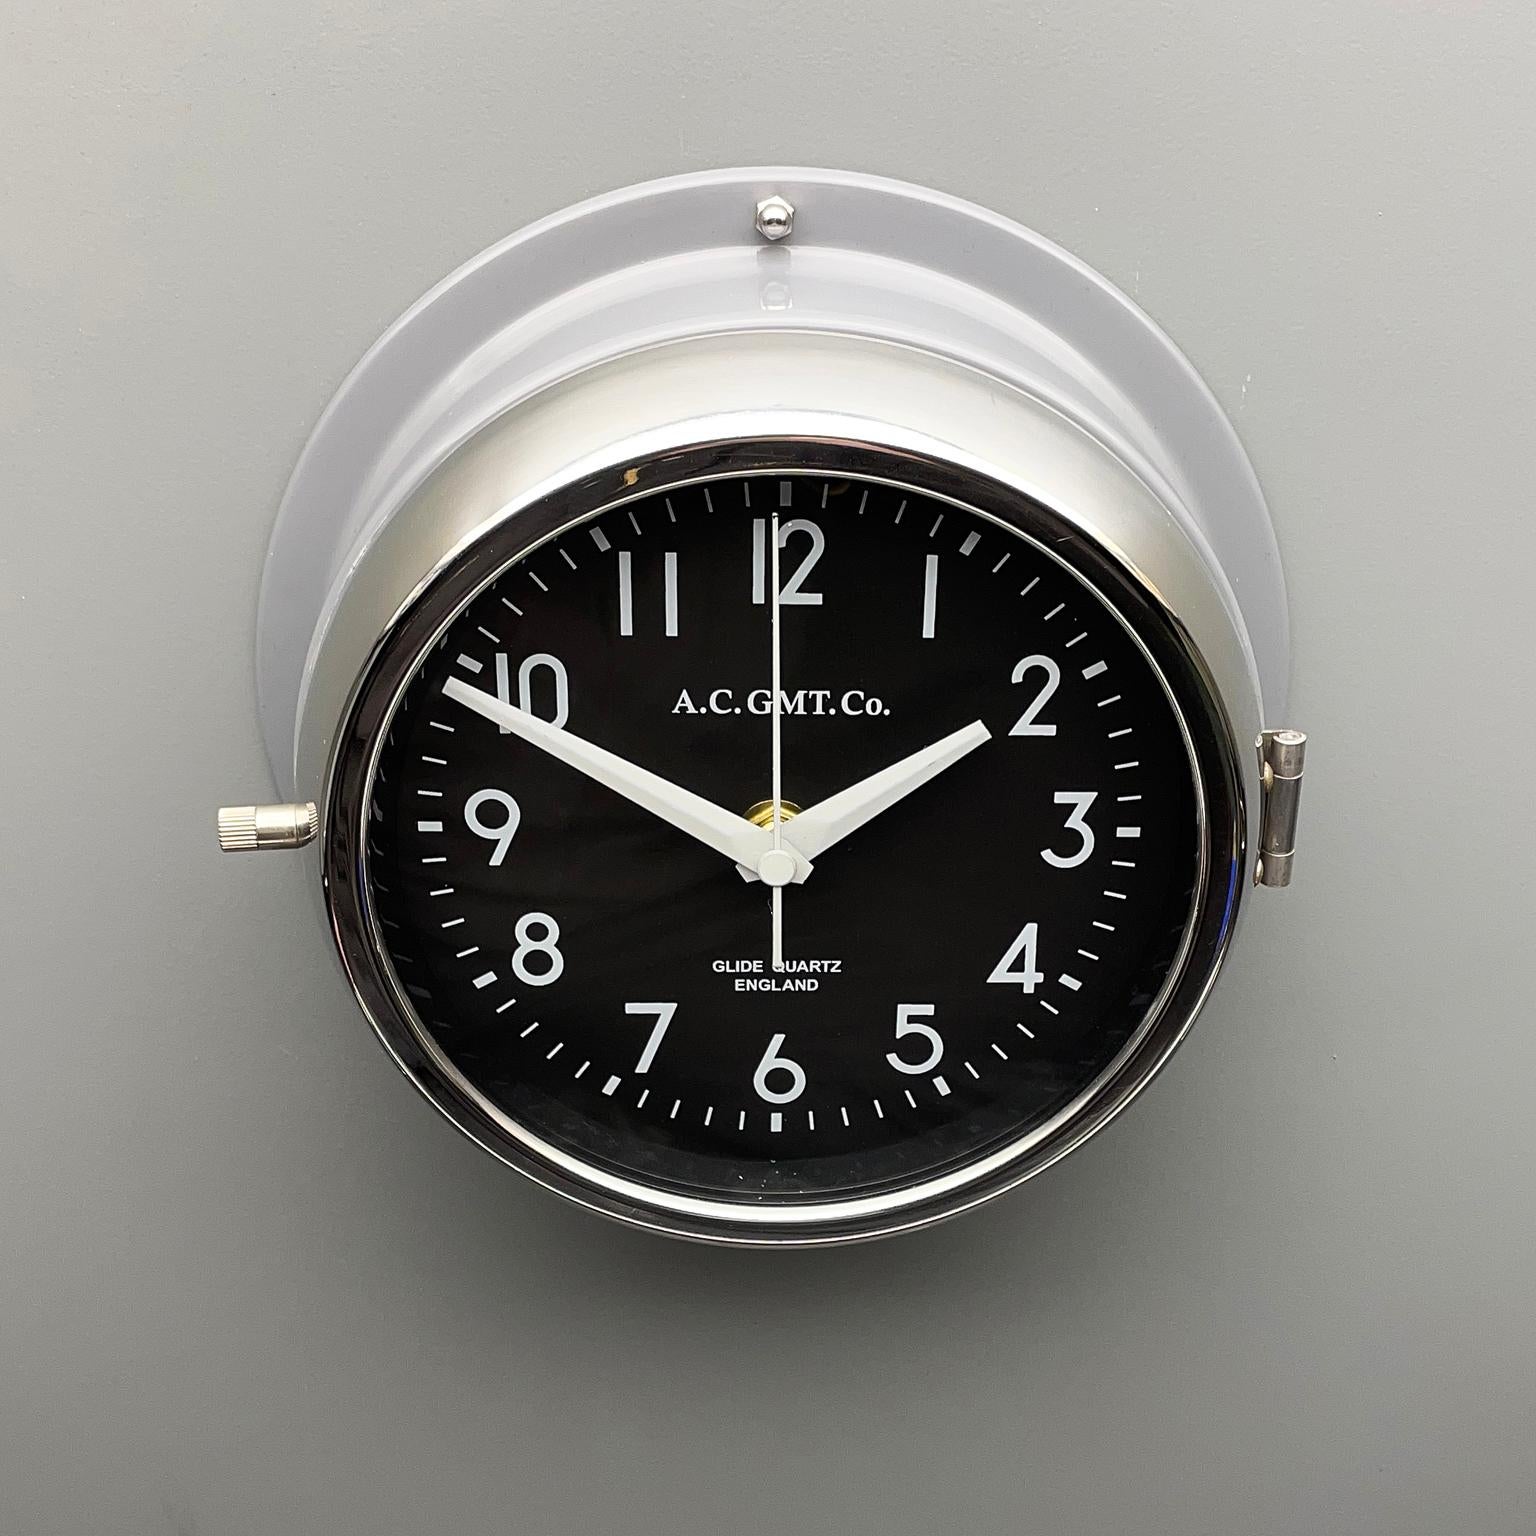 1970's British Ultimate Gray /Monochrome Black AC GMT Co. Classic Wall Clock For Sale 7